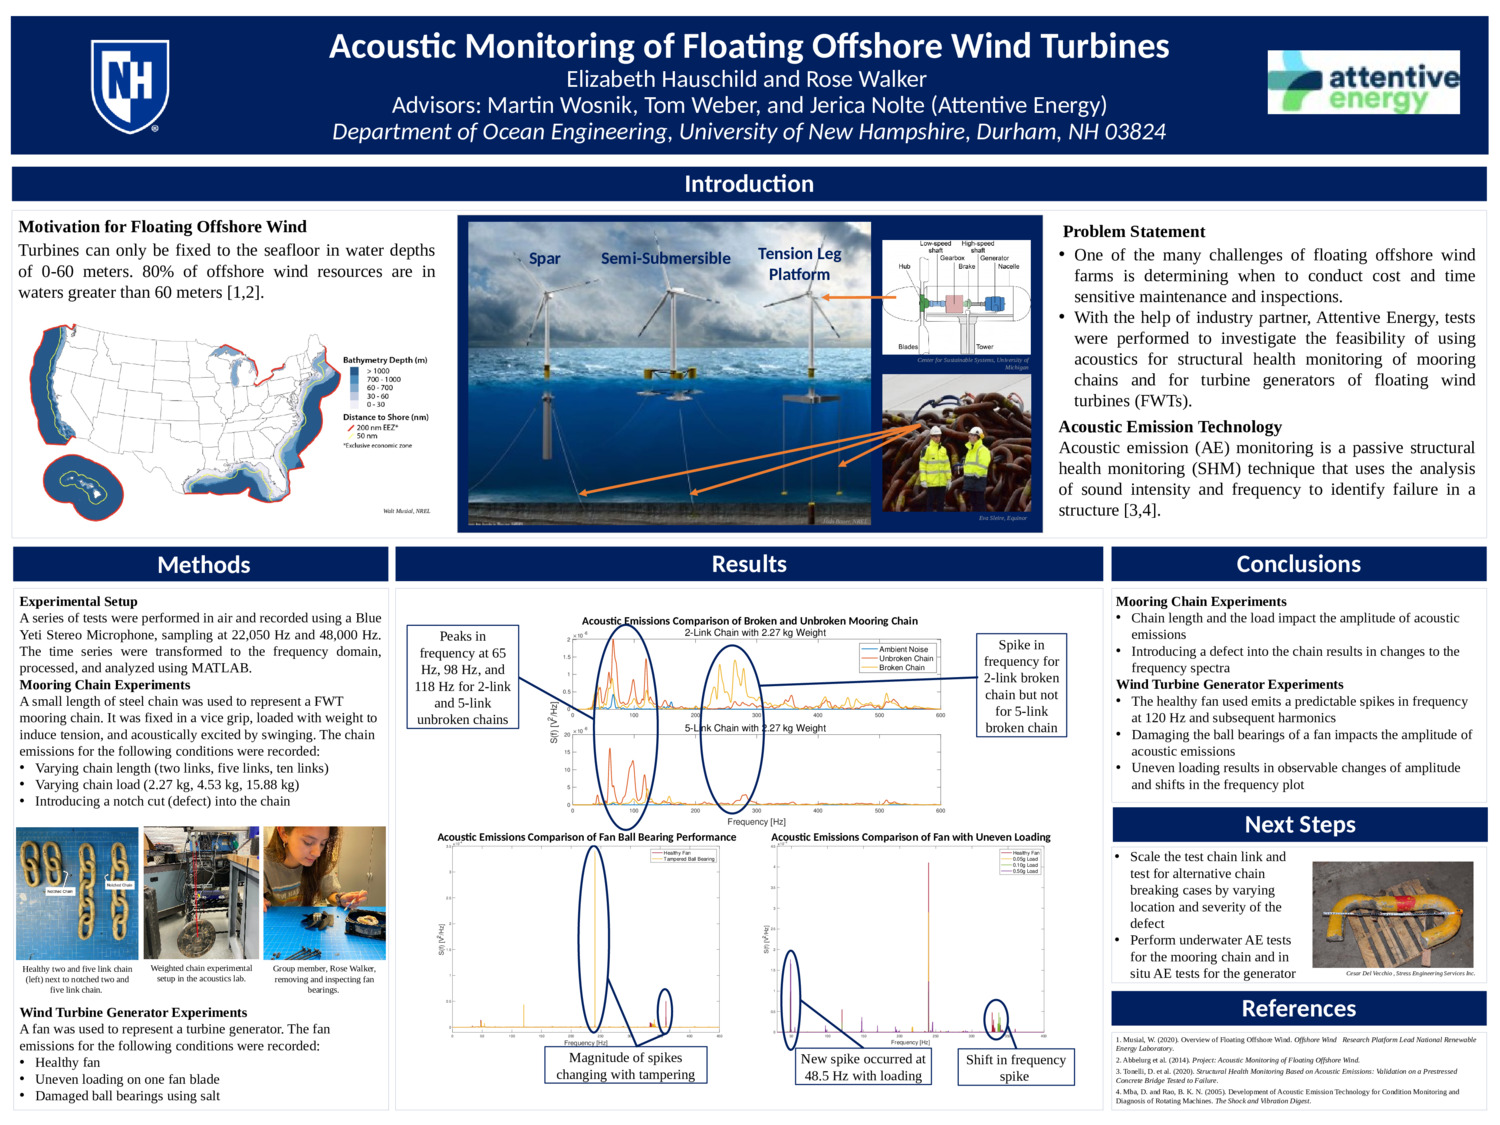 Acoustic Monitoring Of Floating Offshore Wind Turbines by emh1121